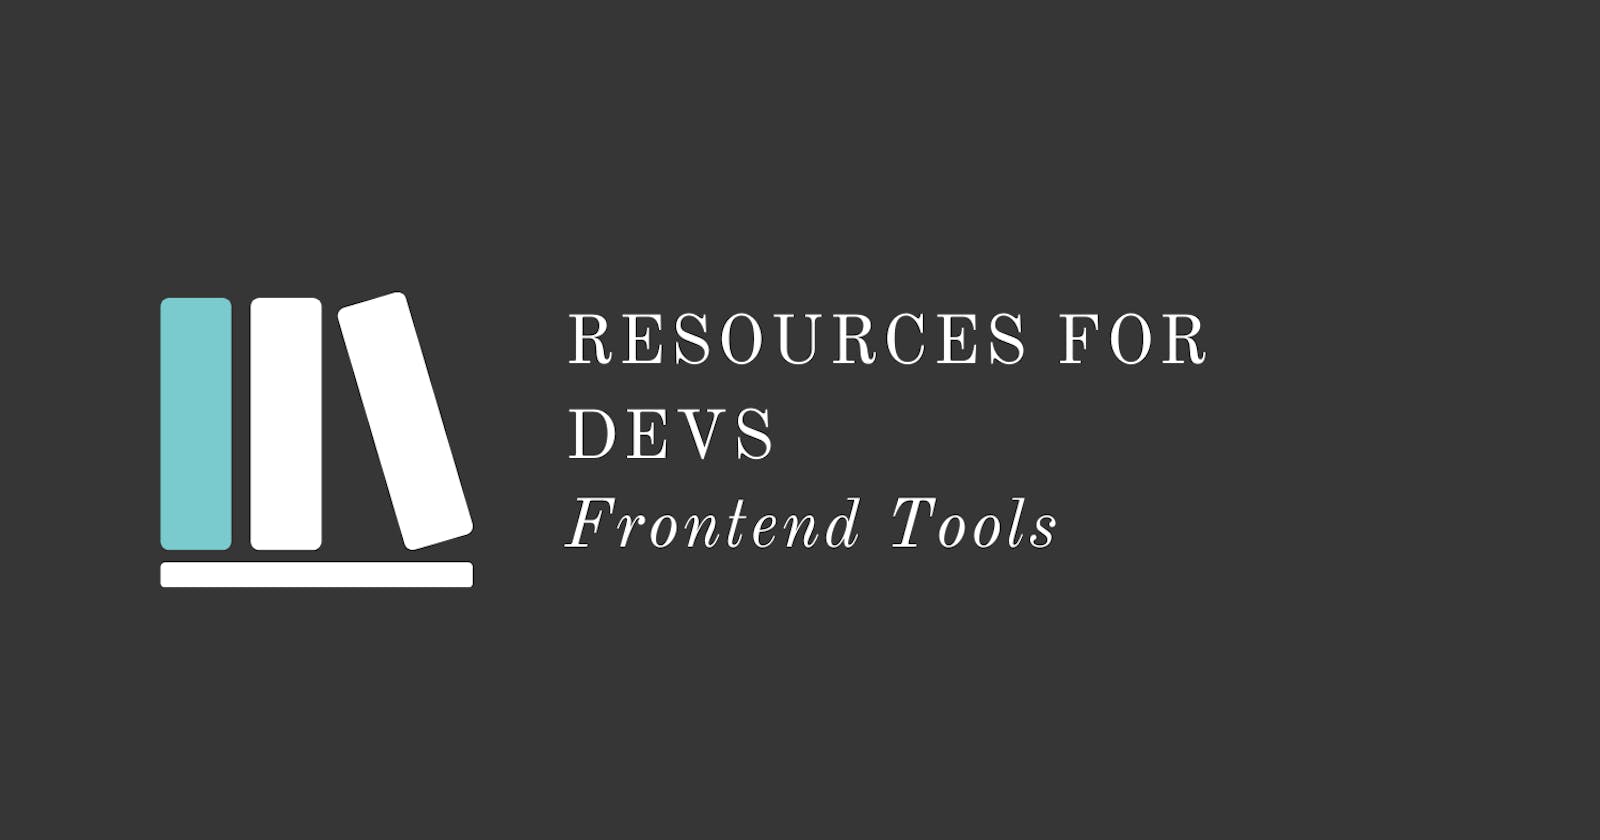 Resources for Devs: Frontend Tools